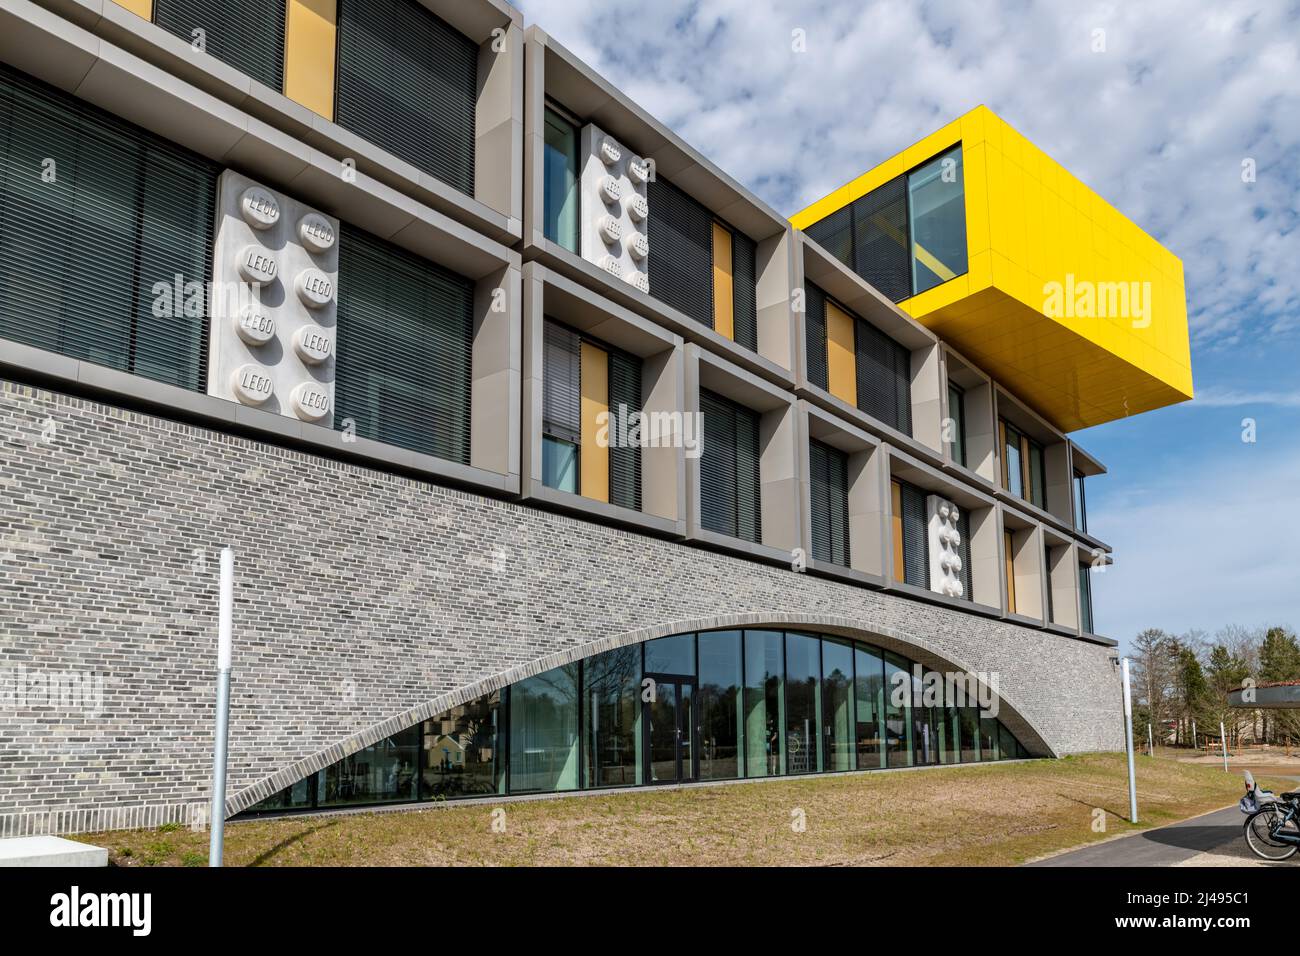 Meget sur Perfervid Hjælp Billund, Denmark. 12th Apr, 2022. Outside the recently opened LEGO® Campus  Buildings in Billund, Denmark including a very large Lego minifigure.  Credit: Thomas Faull/Alamy Live News Stock Photo - Alamy